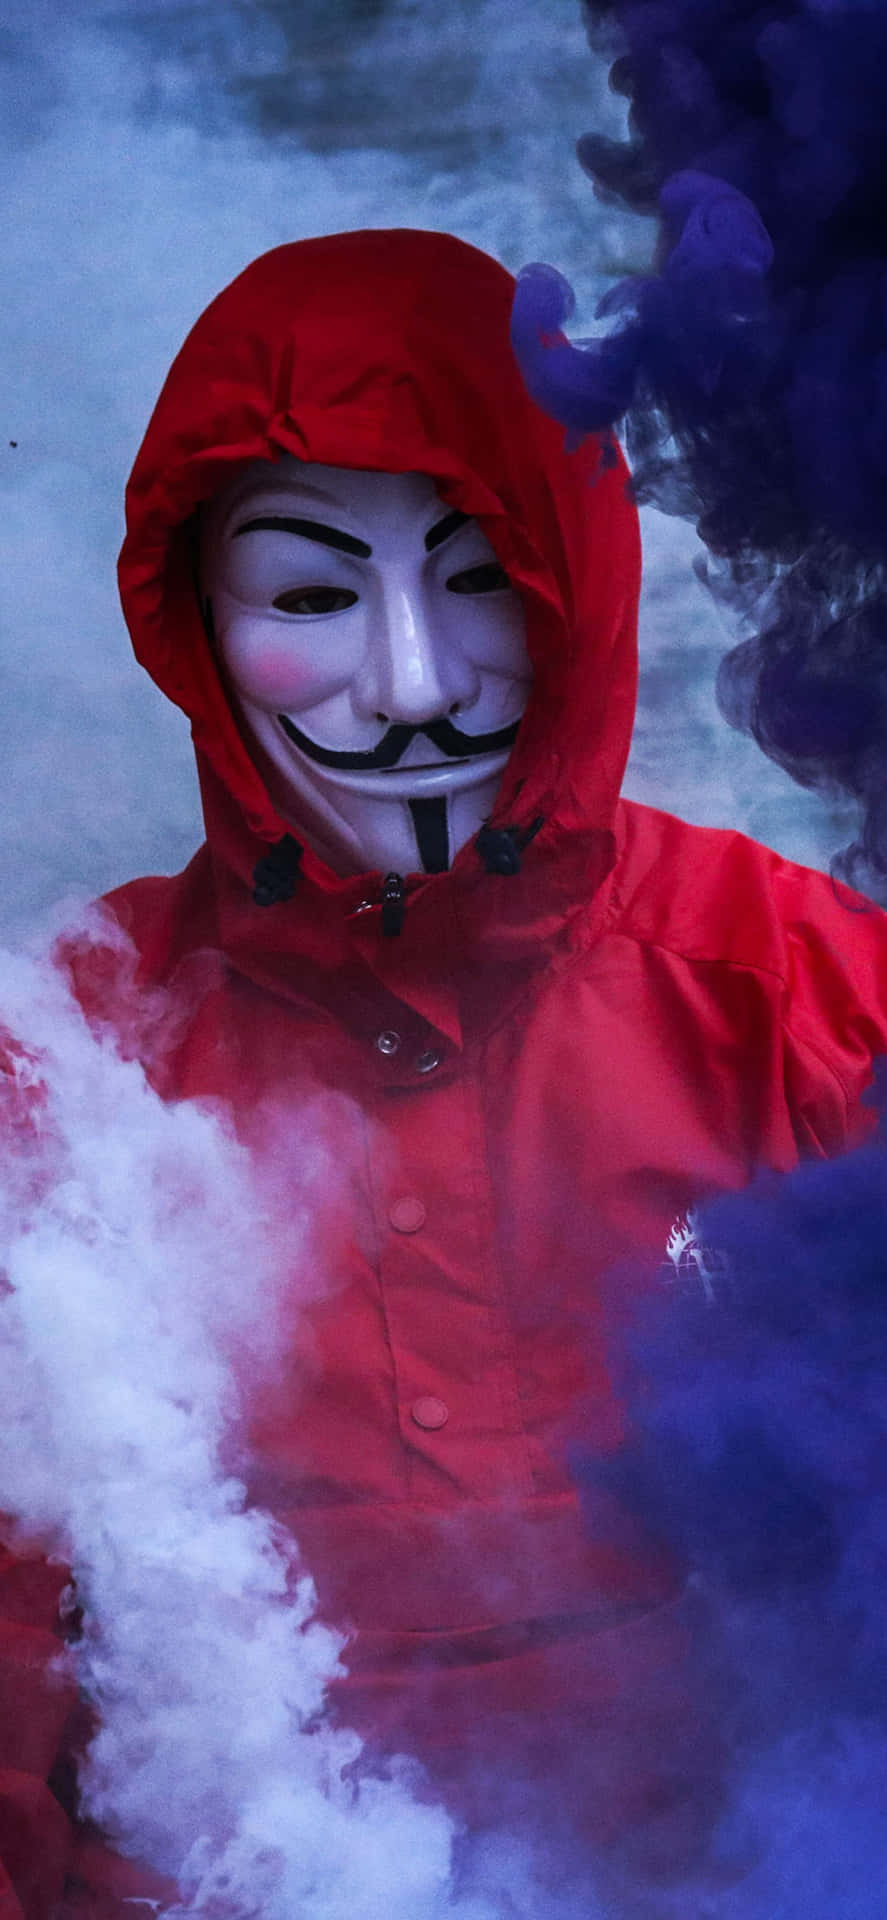 Unlock a revolutionary new iPhone with Anonymous Wallpaper